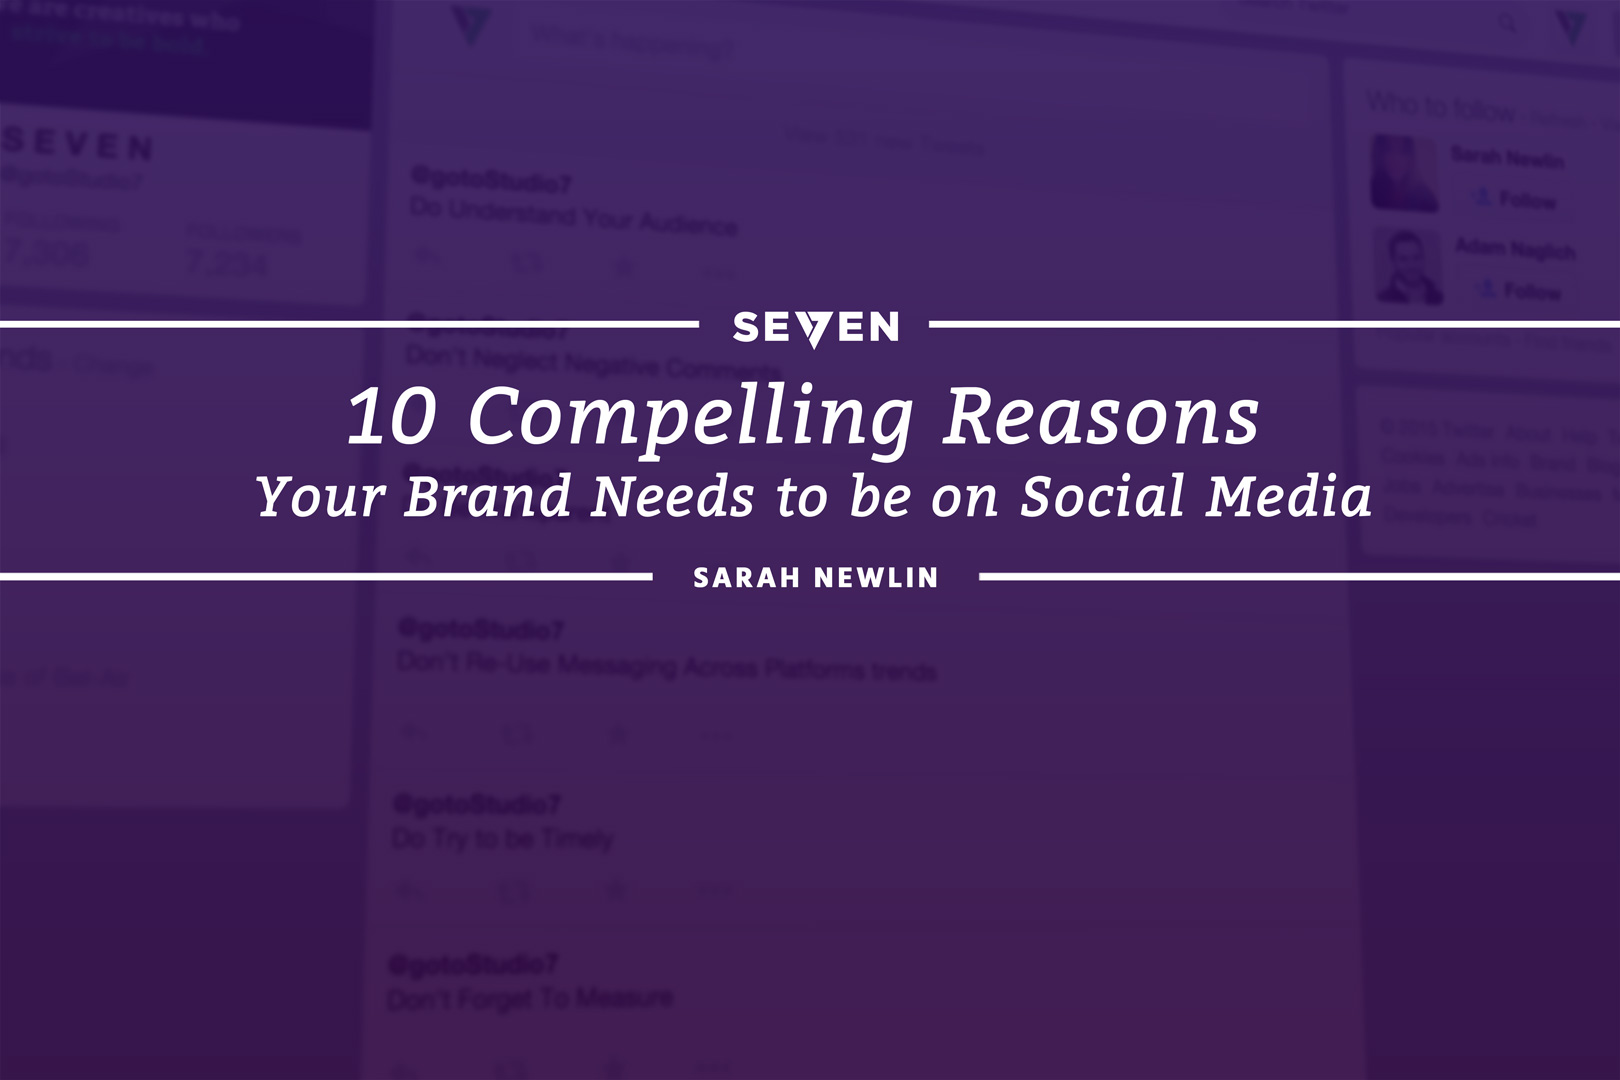 10 Compelling Reasons Your Brand Needs to be on Social Media